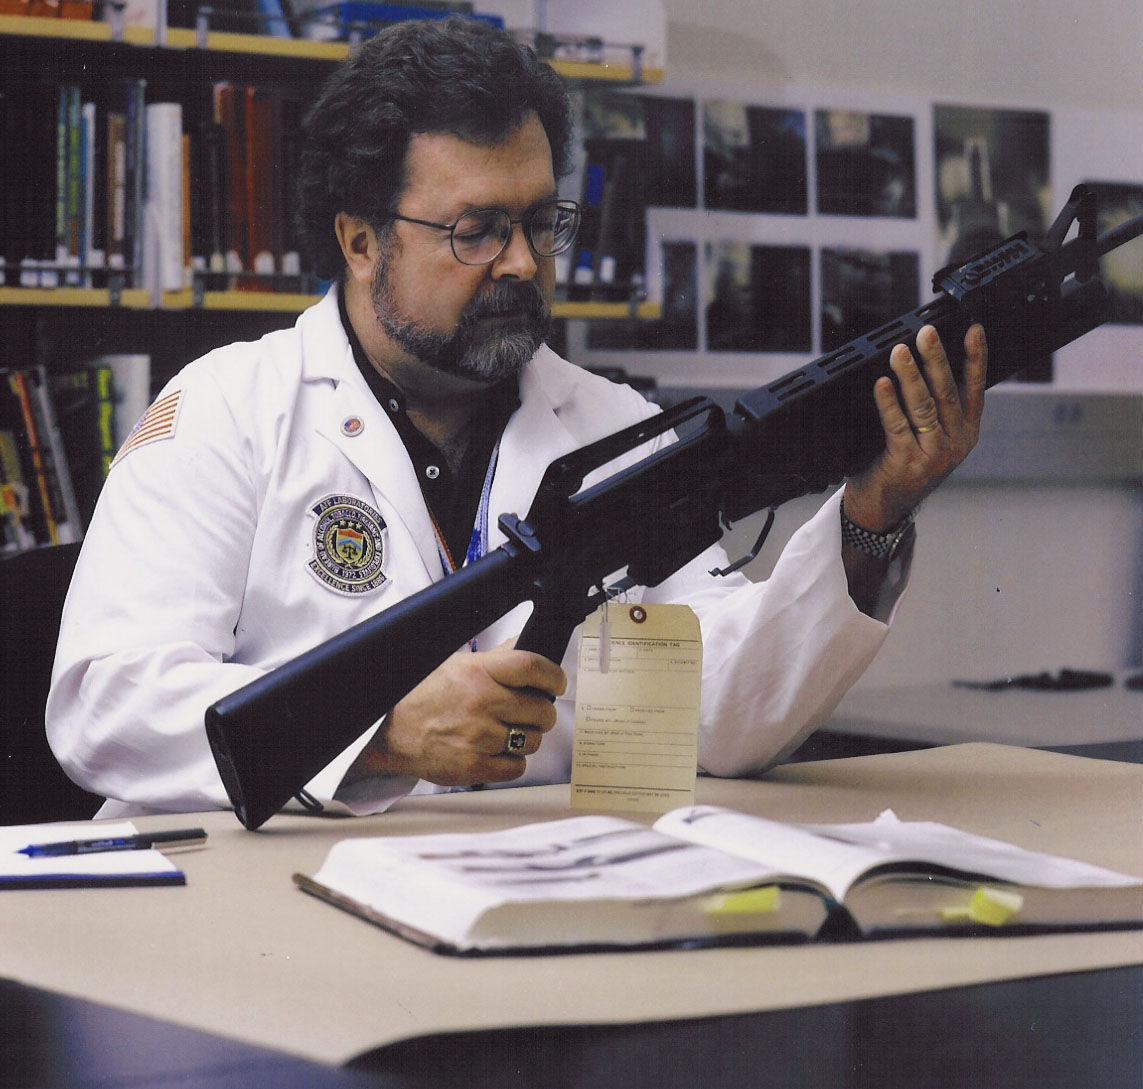 a bearded man with glasses inspecting an AR-15 assault-style weapon